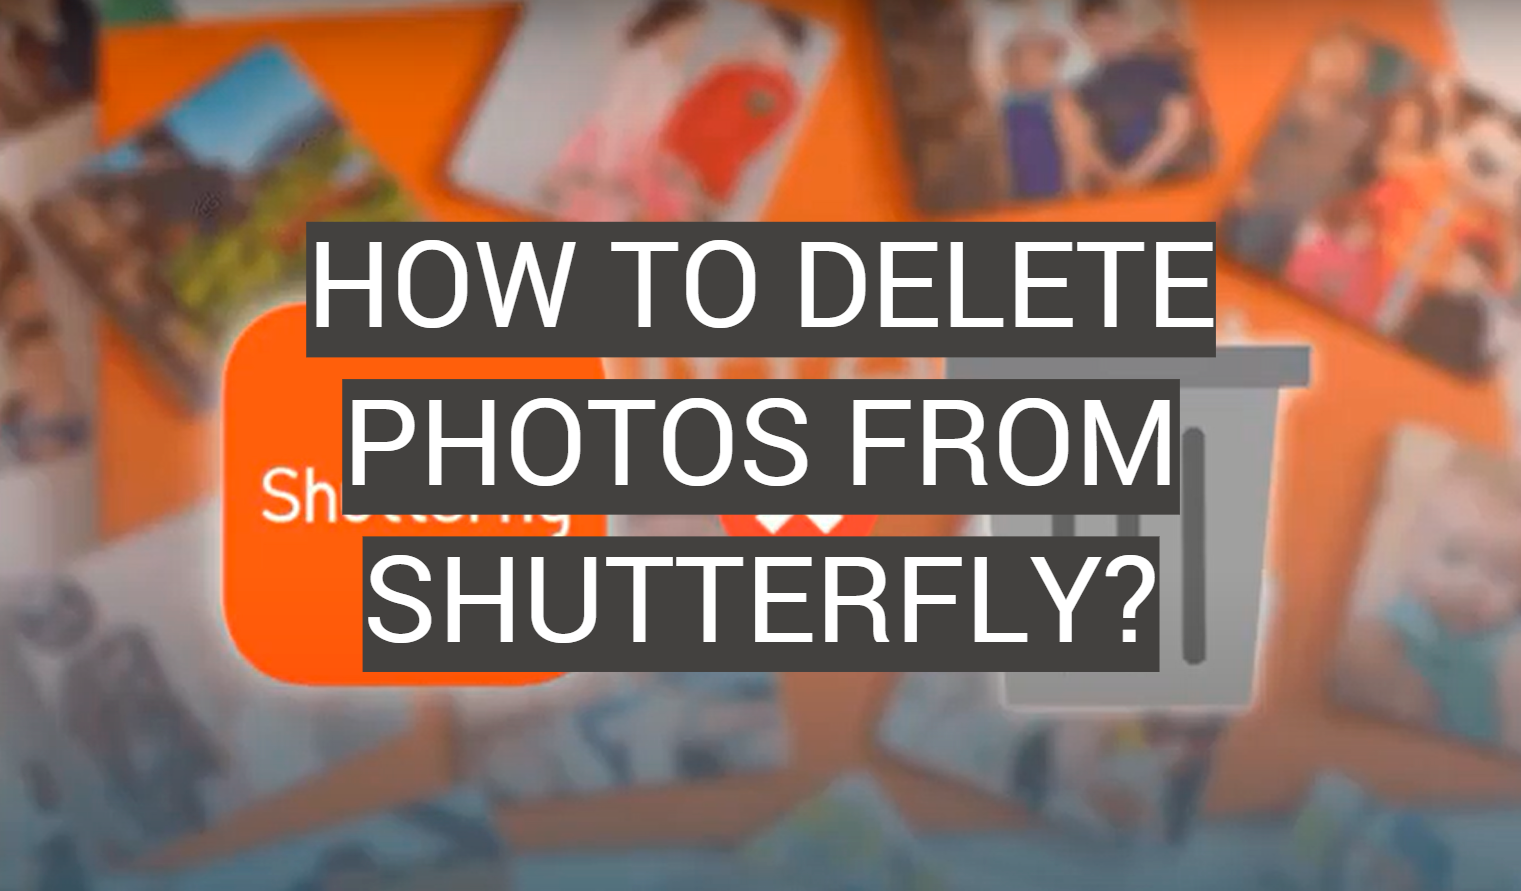 How to Delete Photos From Shutterfly?